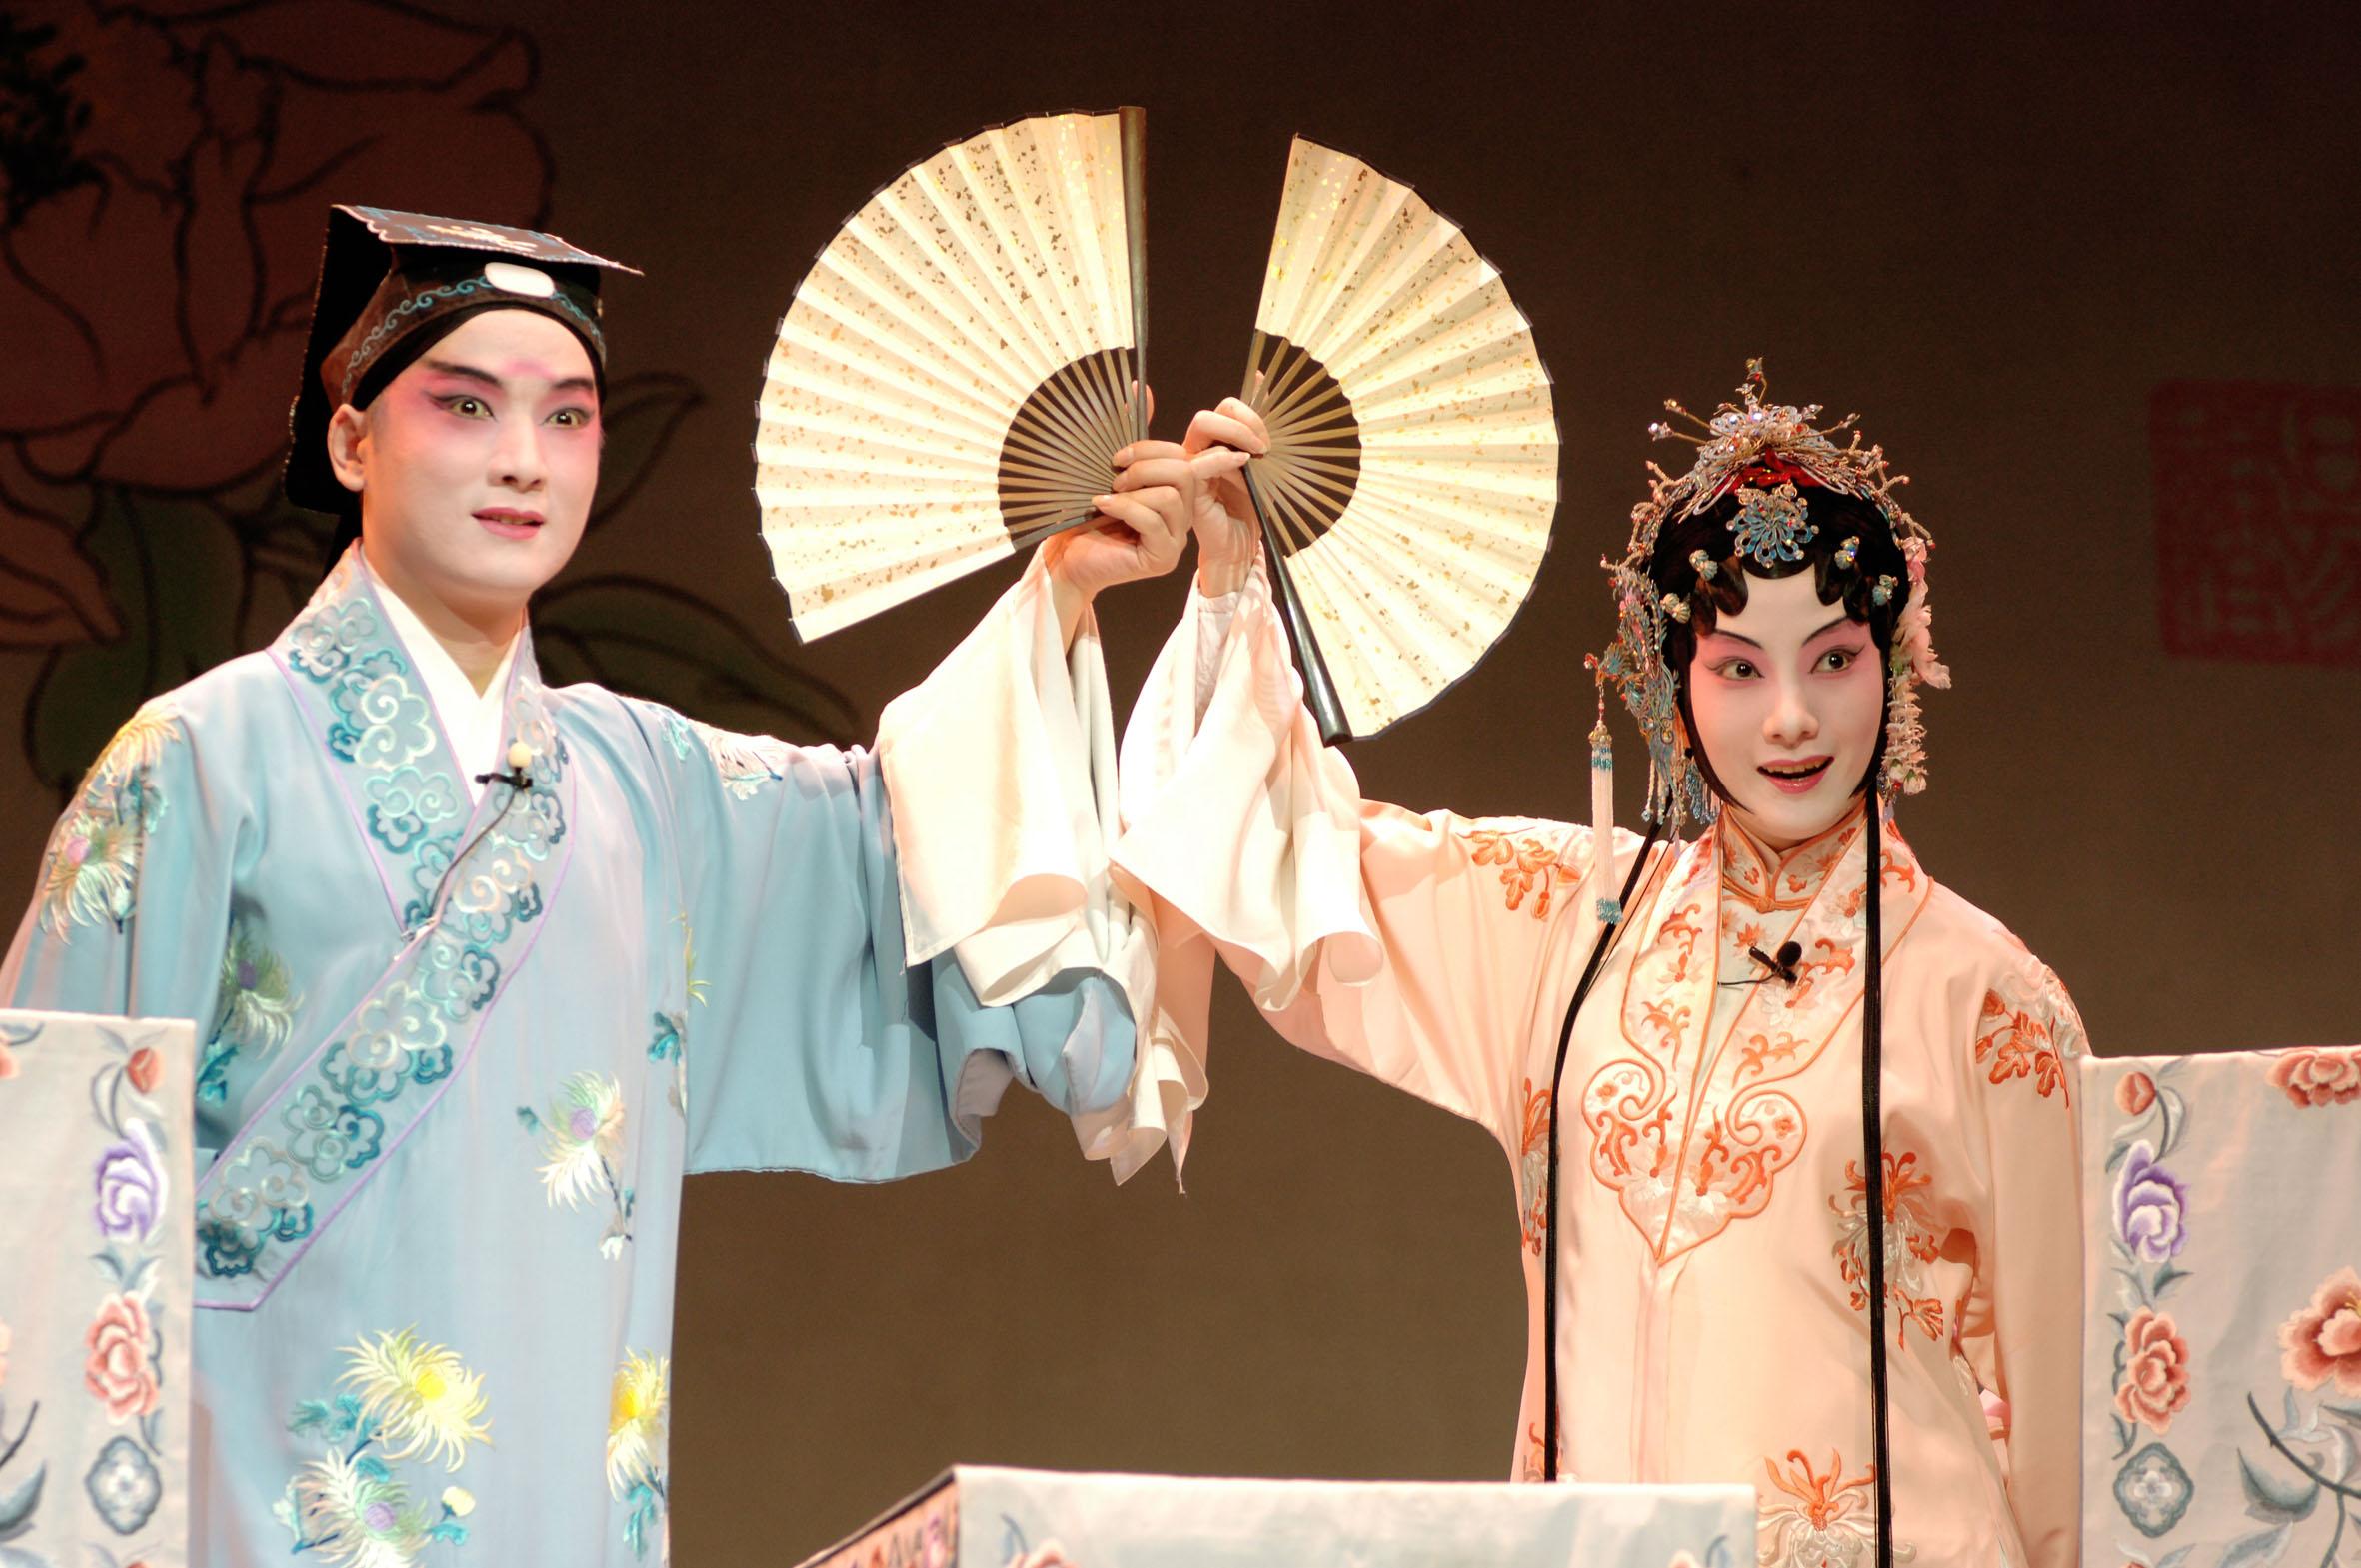 The Suzhou Kunqu Opera Theatre of Jiangsu will present "'The Peony Pavilion' - The Youth Version" at the Chinese Opera Festival 2023 in July, featuring the original cast. Photo shows a scene of Part Three: "Love in this World".